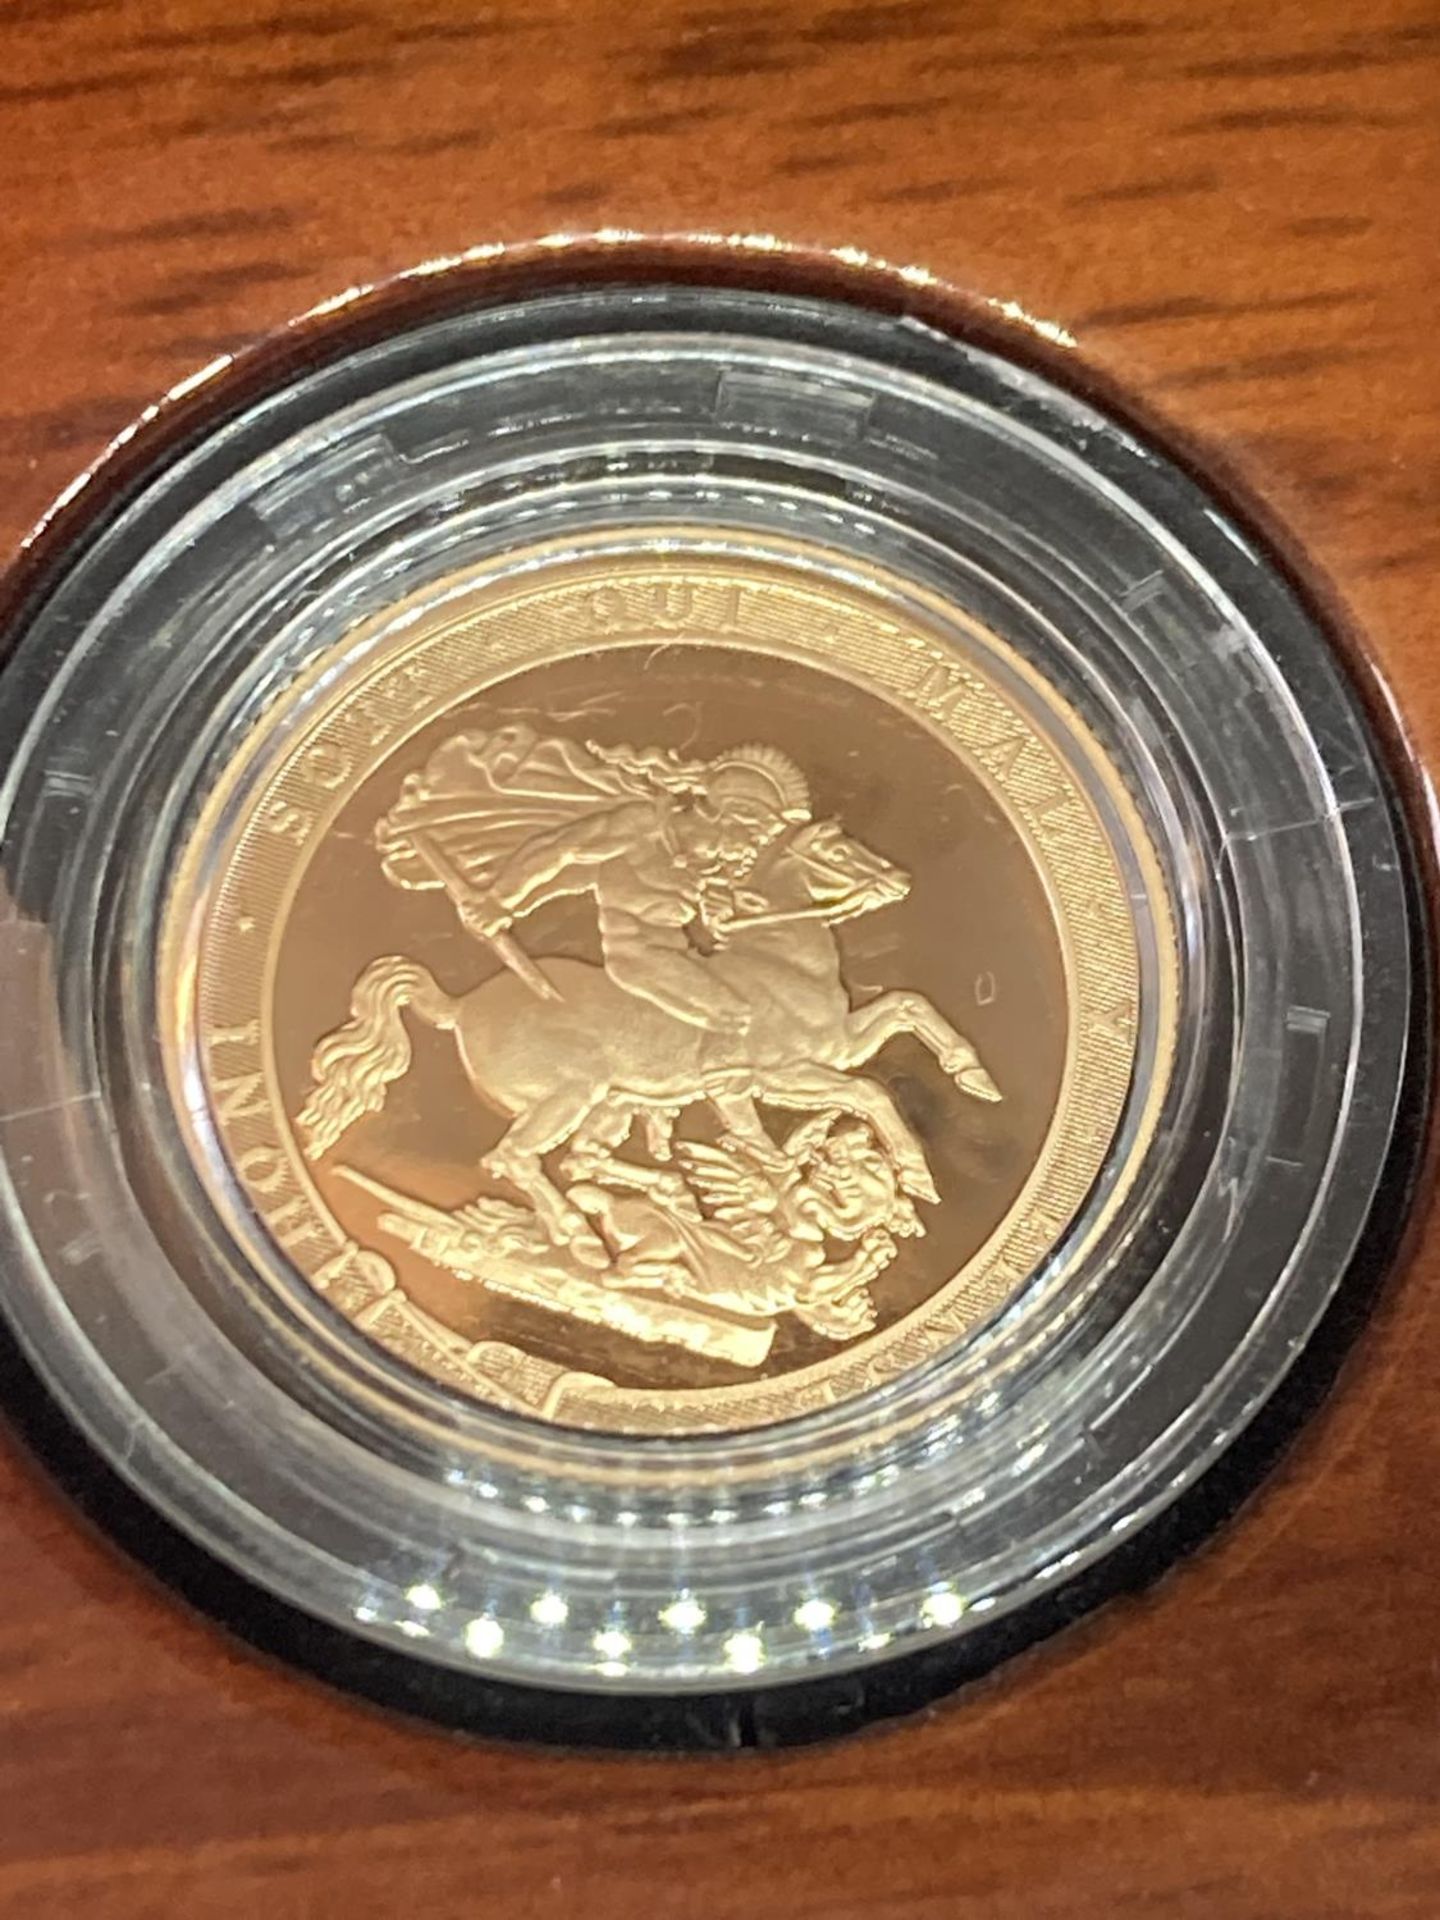 A 2017 THE SOVEREIGN GOLD PROOF LIMITED EDITION NUMBER 4,564 OF 10,500 IN A WOODEN BOXED CASE - Image 2 of 5